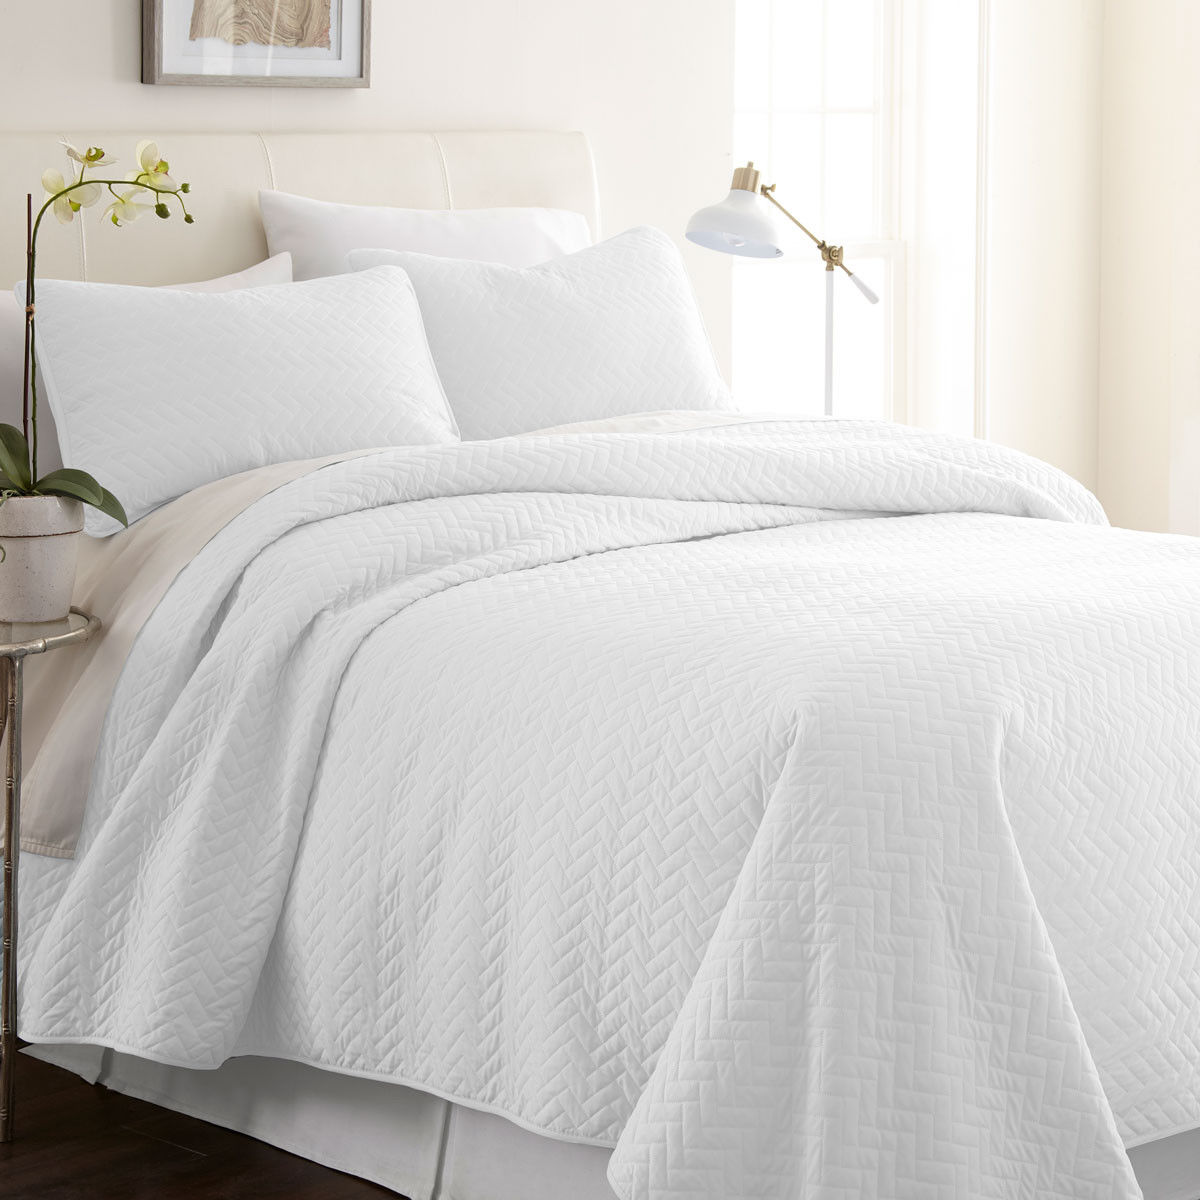 What are the available sizes for the 3-Piece Herring Quilted Coverlet Set?